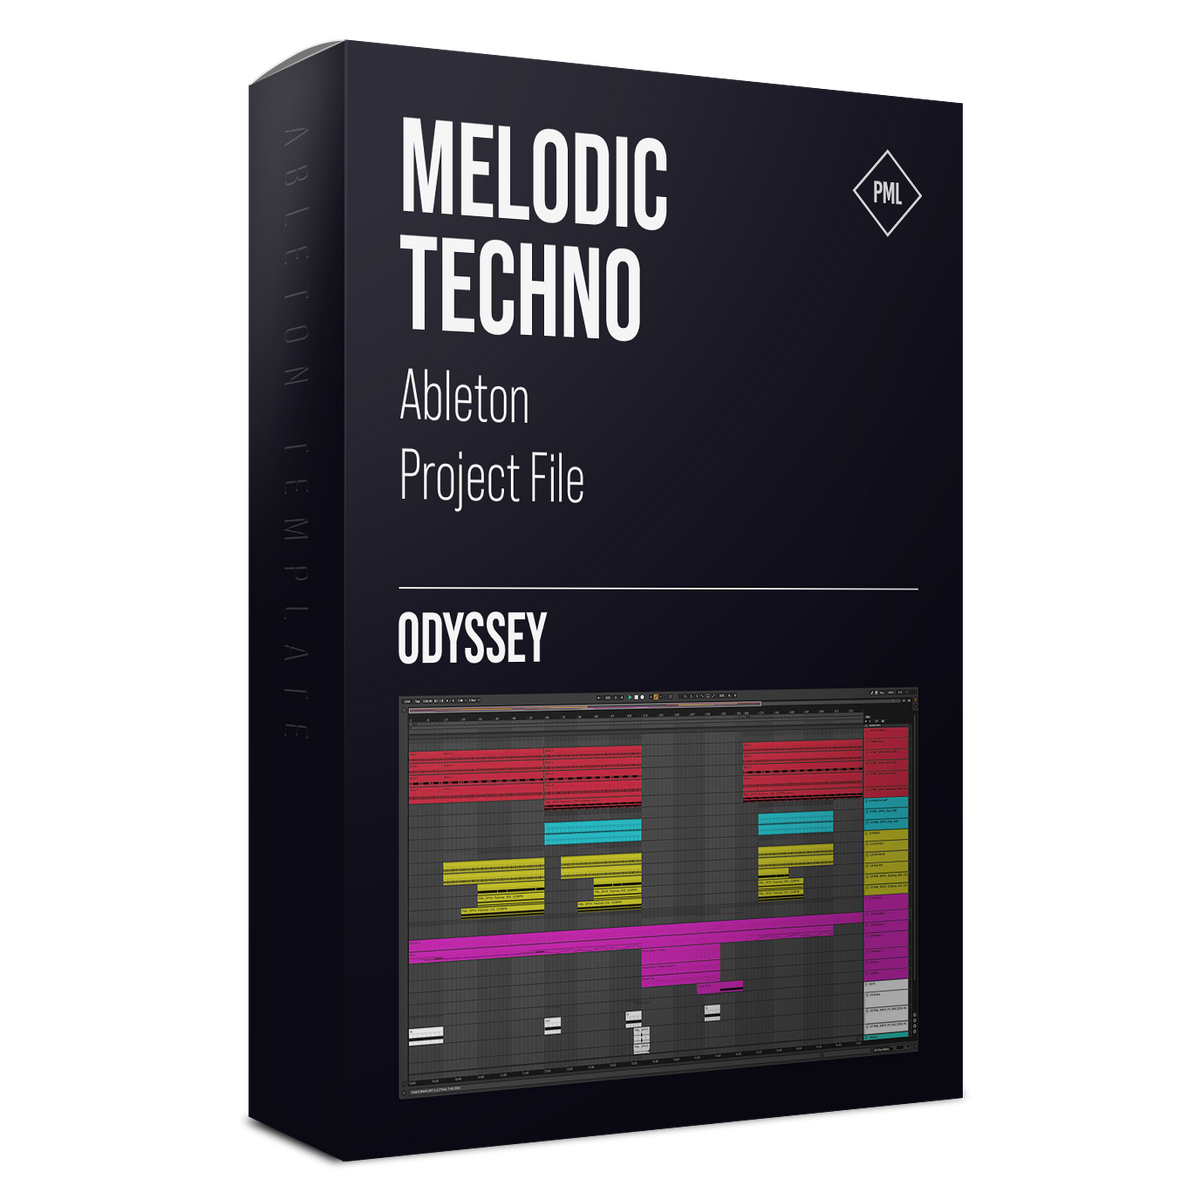 Melodic Techno - Odyssey - Ableton Project File by Johannes Menzel Product Box